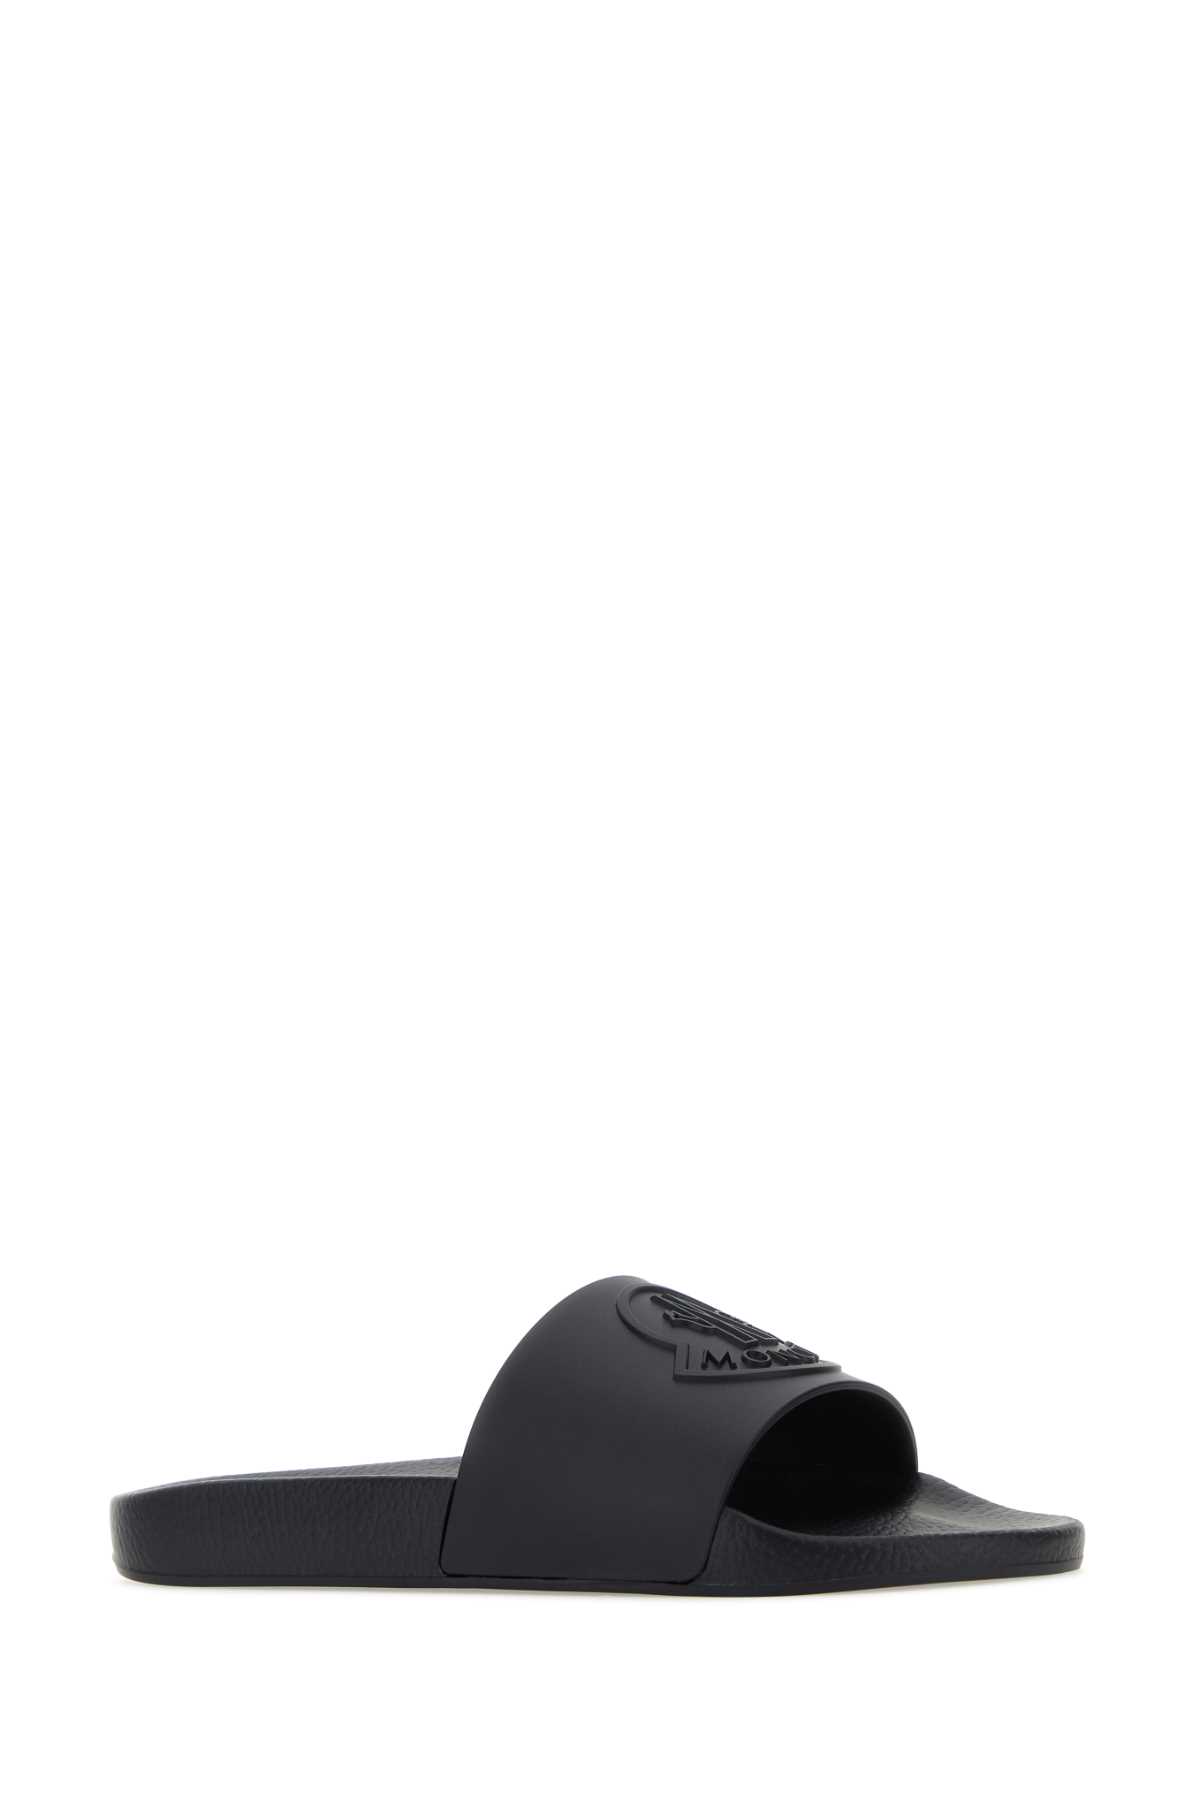 Moncler Midnight Blue Rubber Basile Slippers In 778